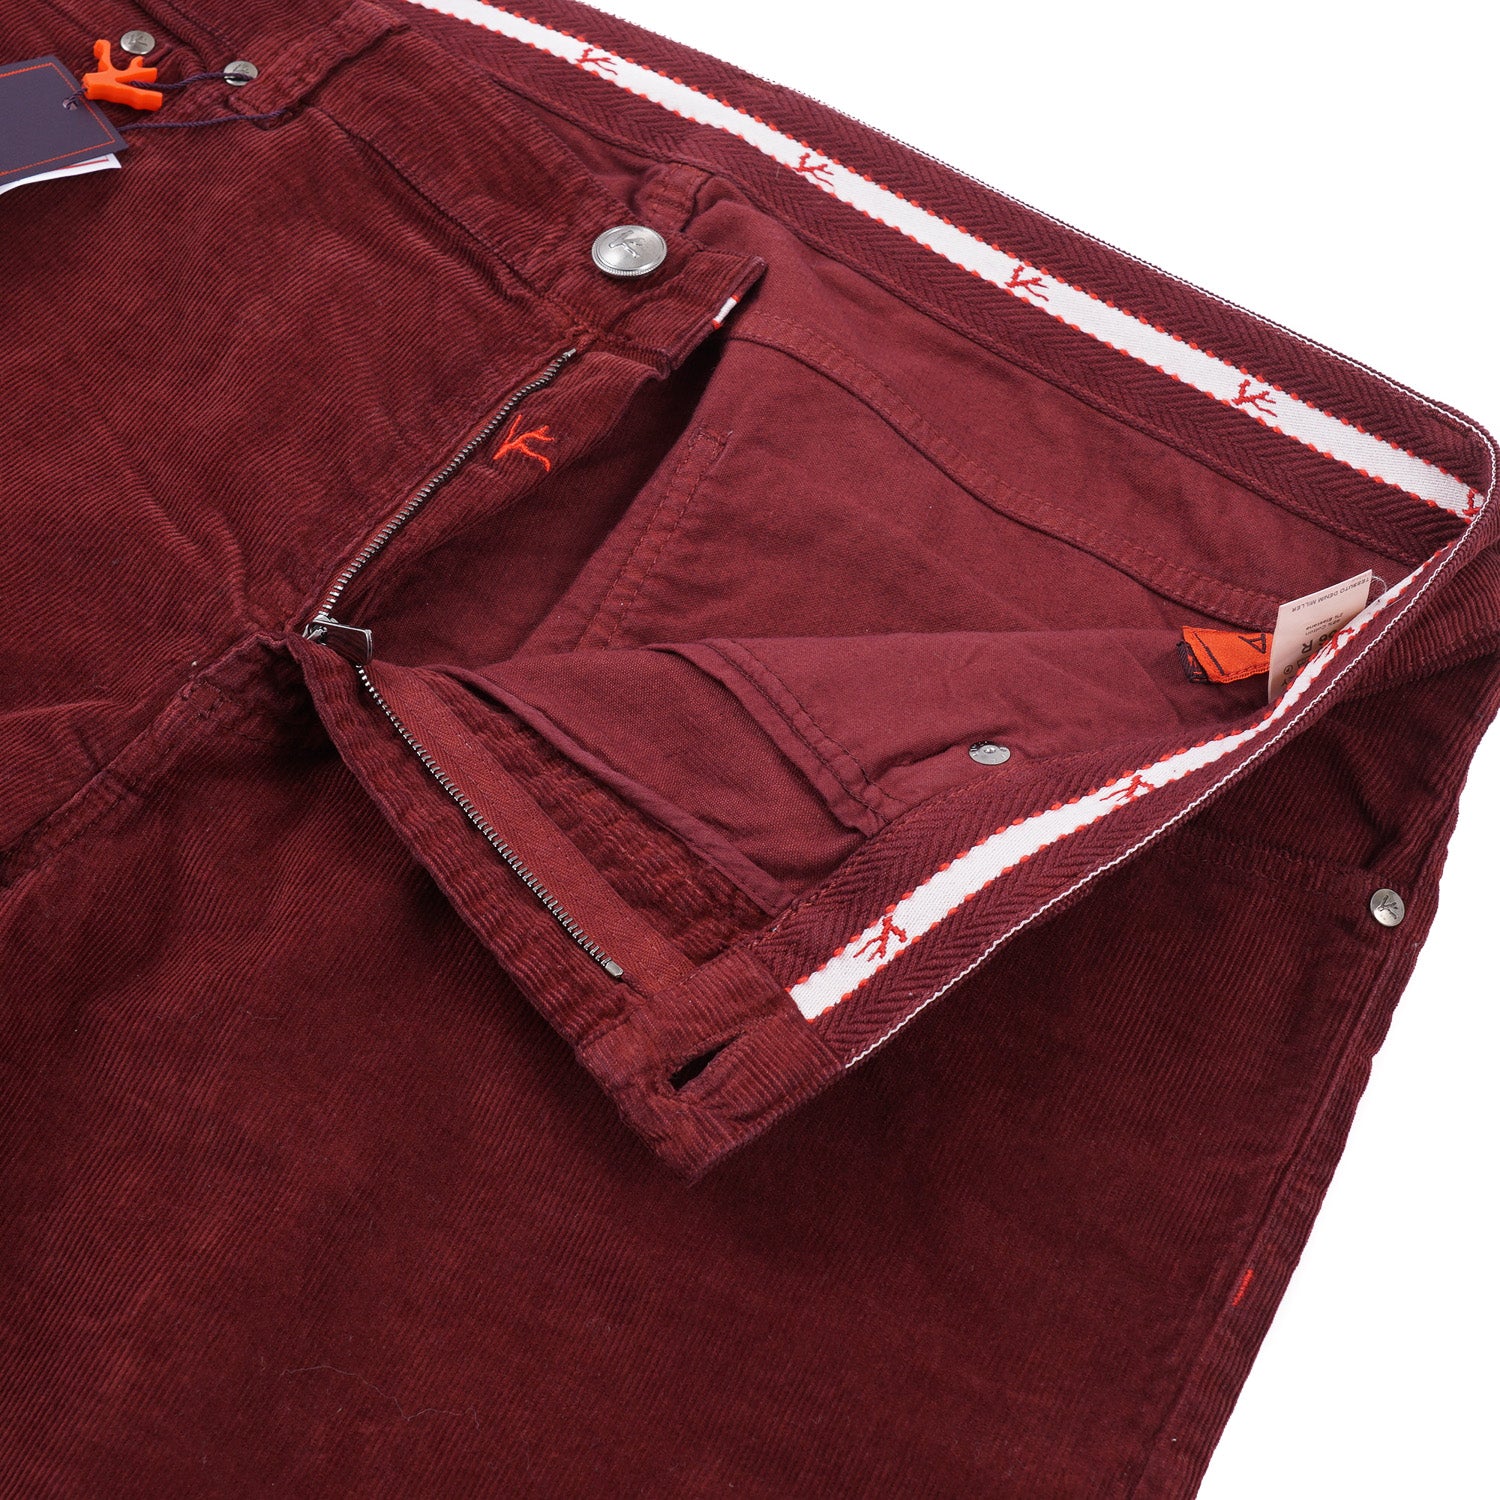 Closed buttonjetted Pockets Corduroy Trousers  Farfetch